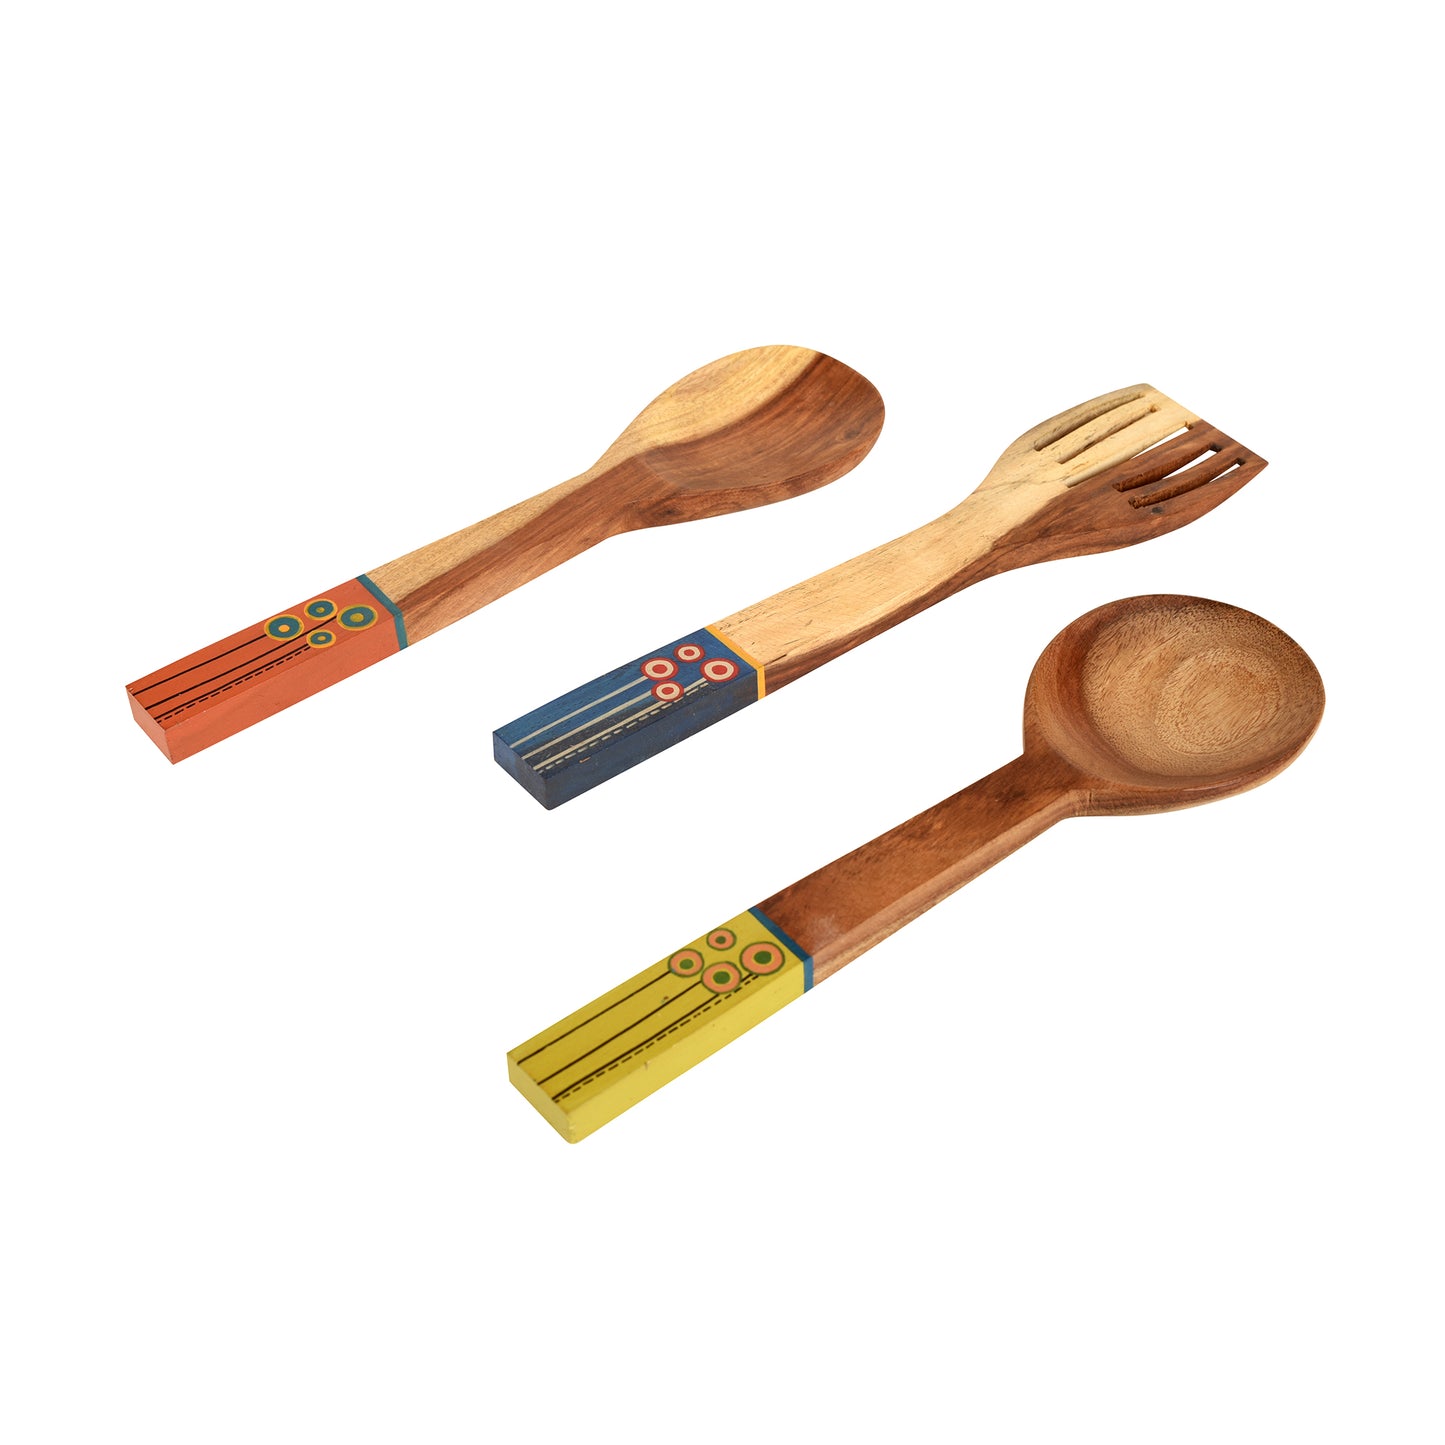 Handcrafted Wooden Ladles (Set of 3)